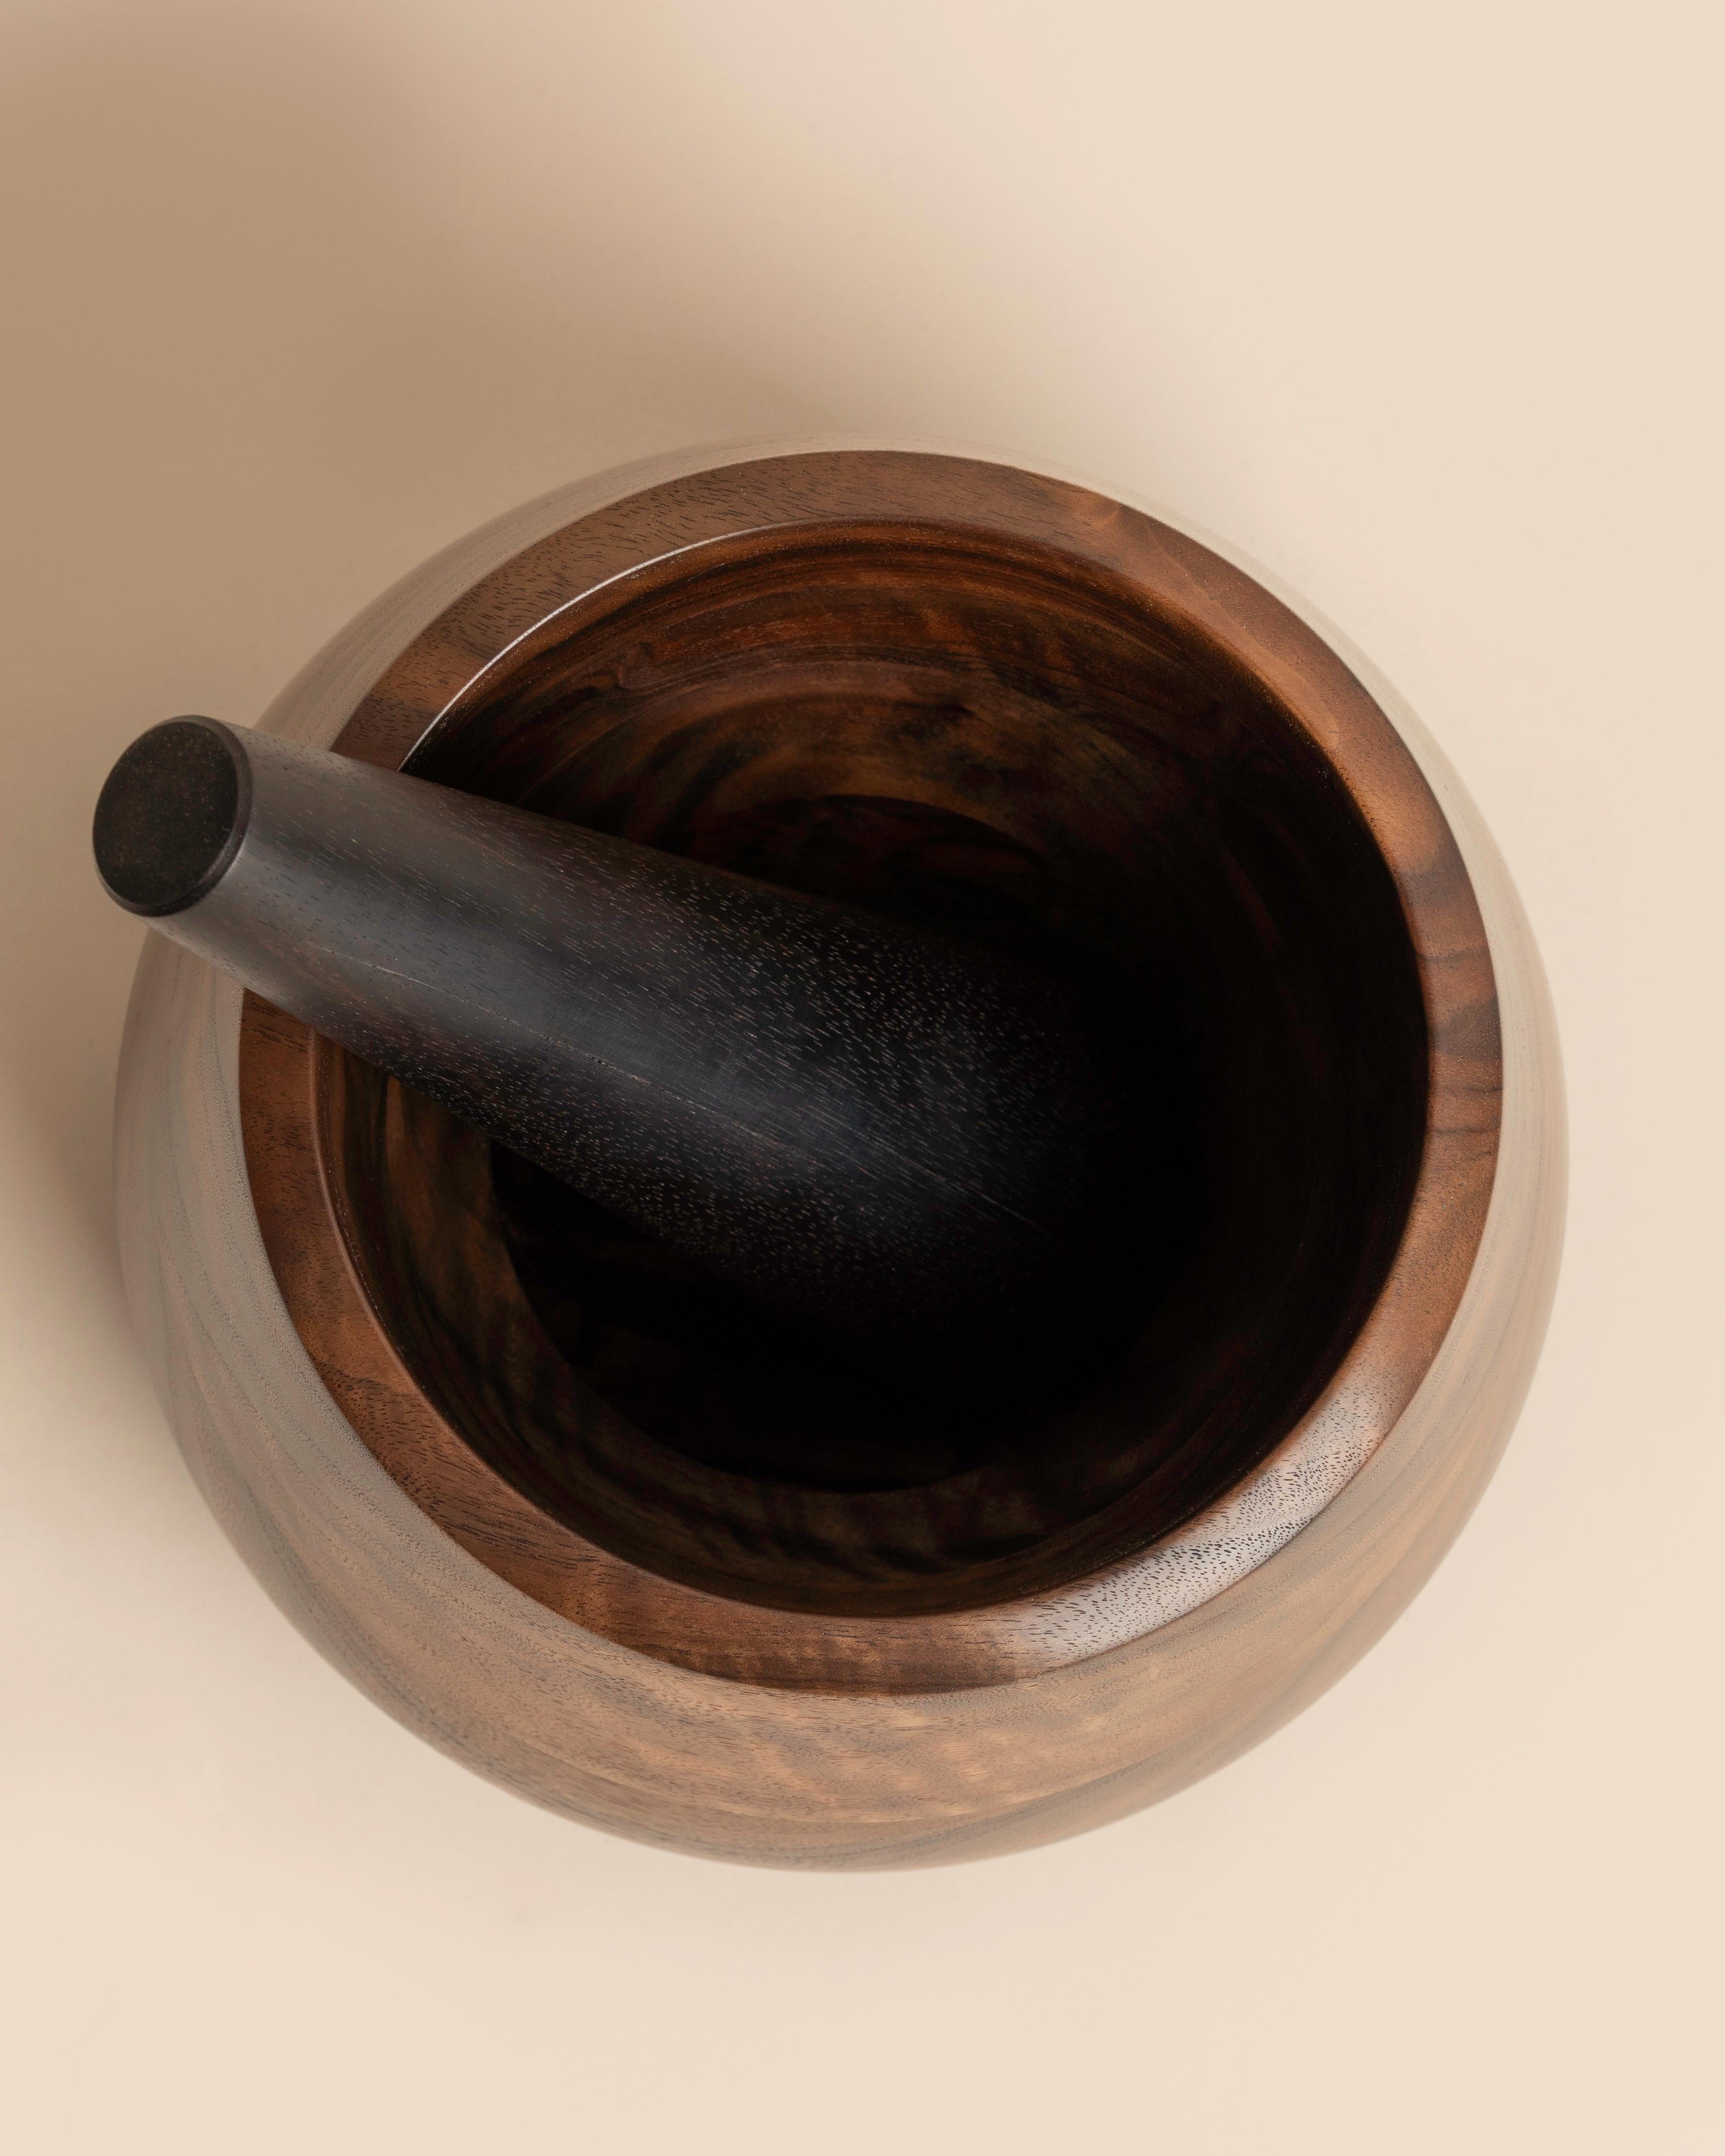 Oversized Mortar & Pestle in Claro Walnut and Ebony In New Condition For Sale In Calgary, CA